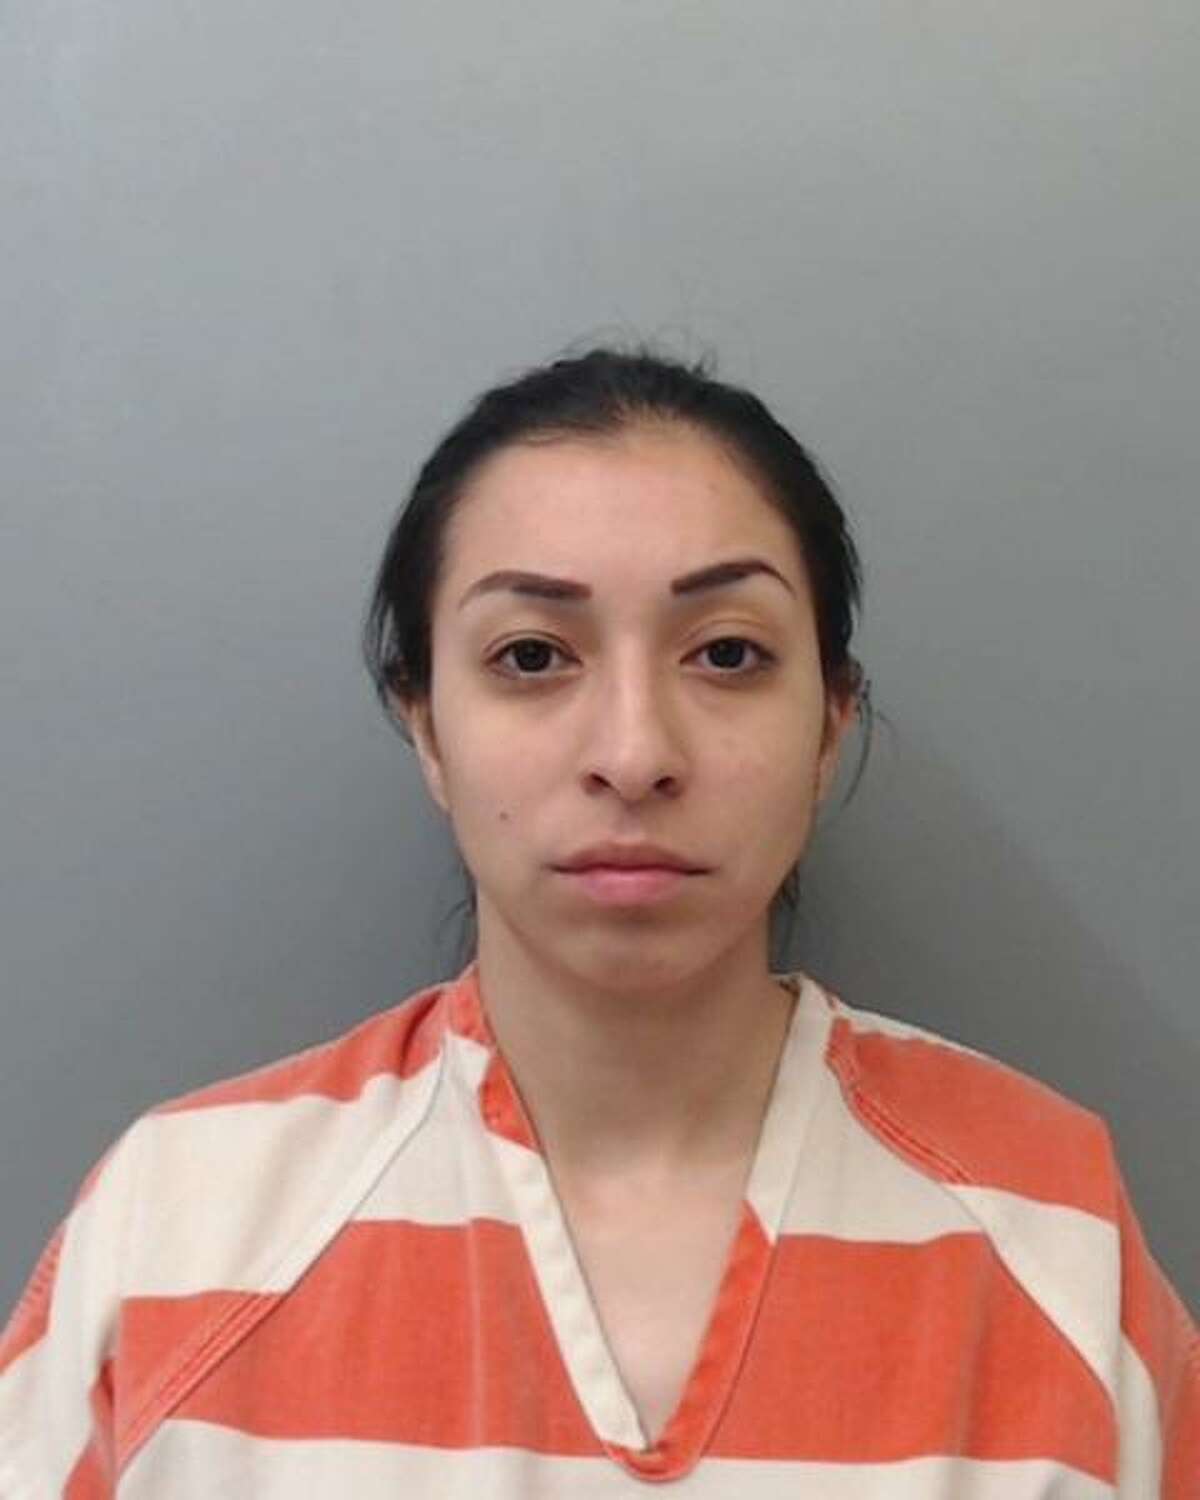 Selena Lizette Aguilar, 29, was charged with aggravated assault with a weapon.